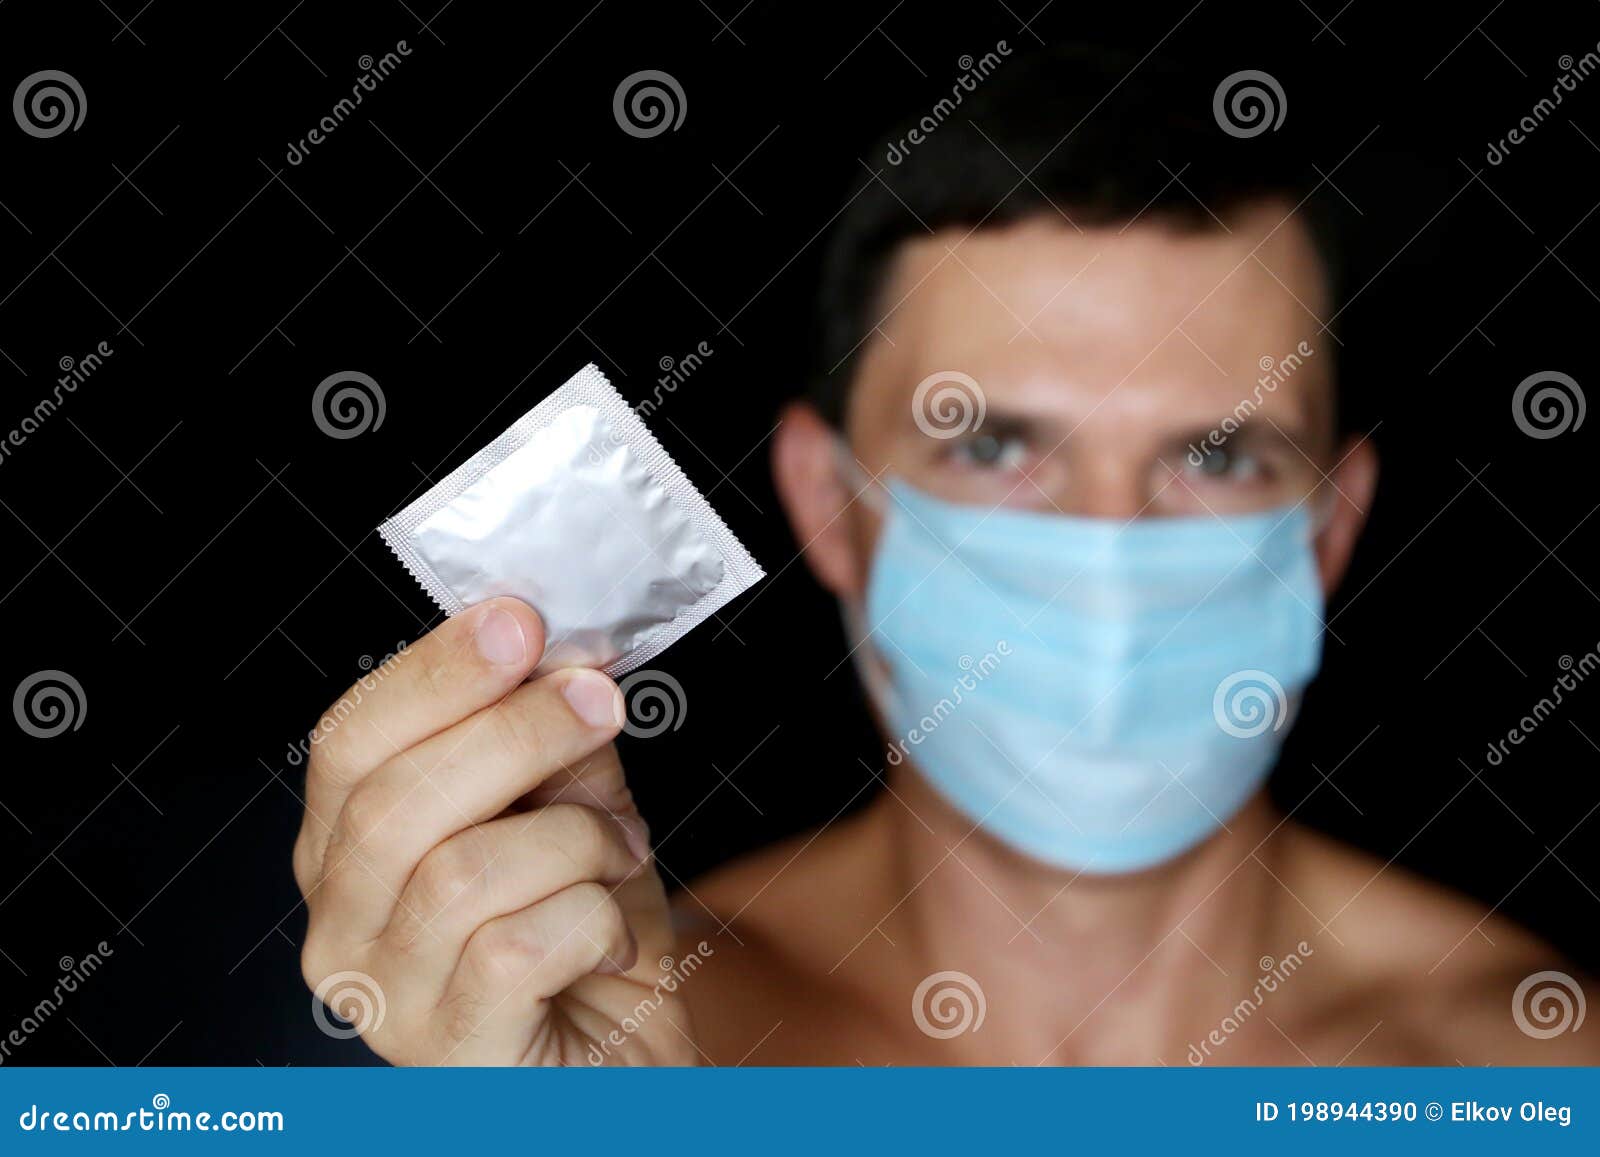 Condom in Male Hands Close Up, Safe Sex during Coronavirus Pandemic